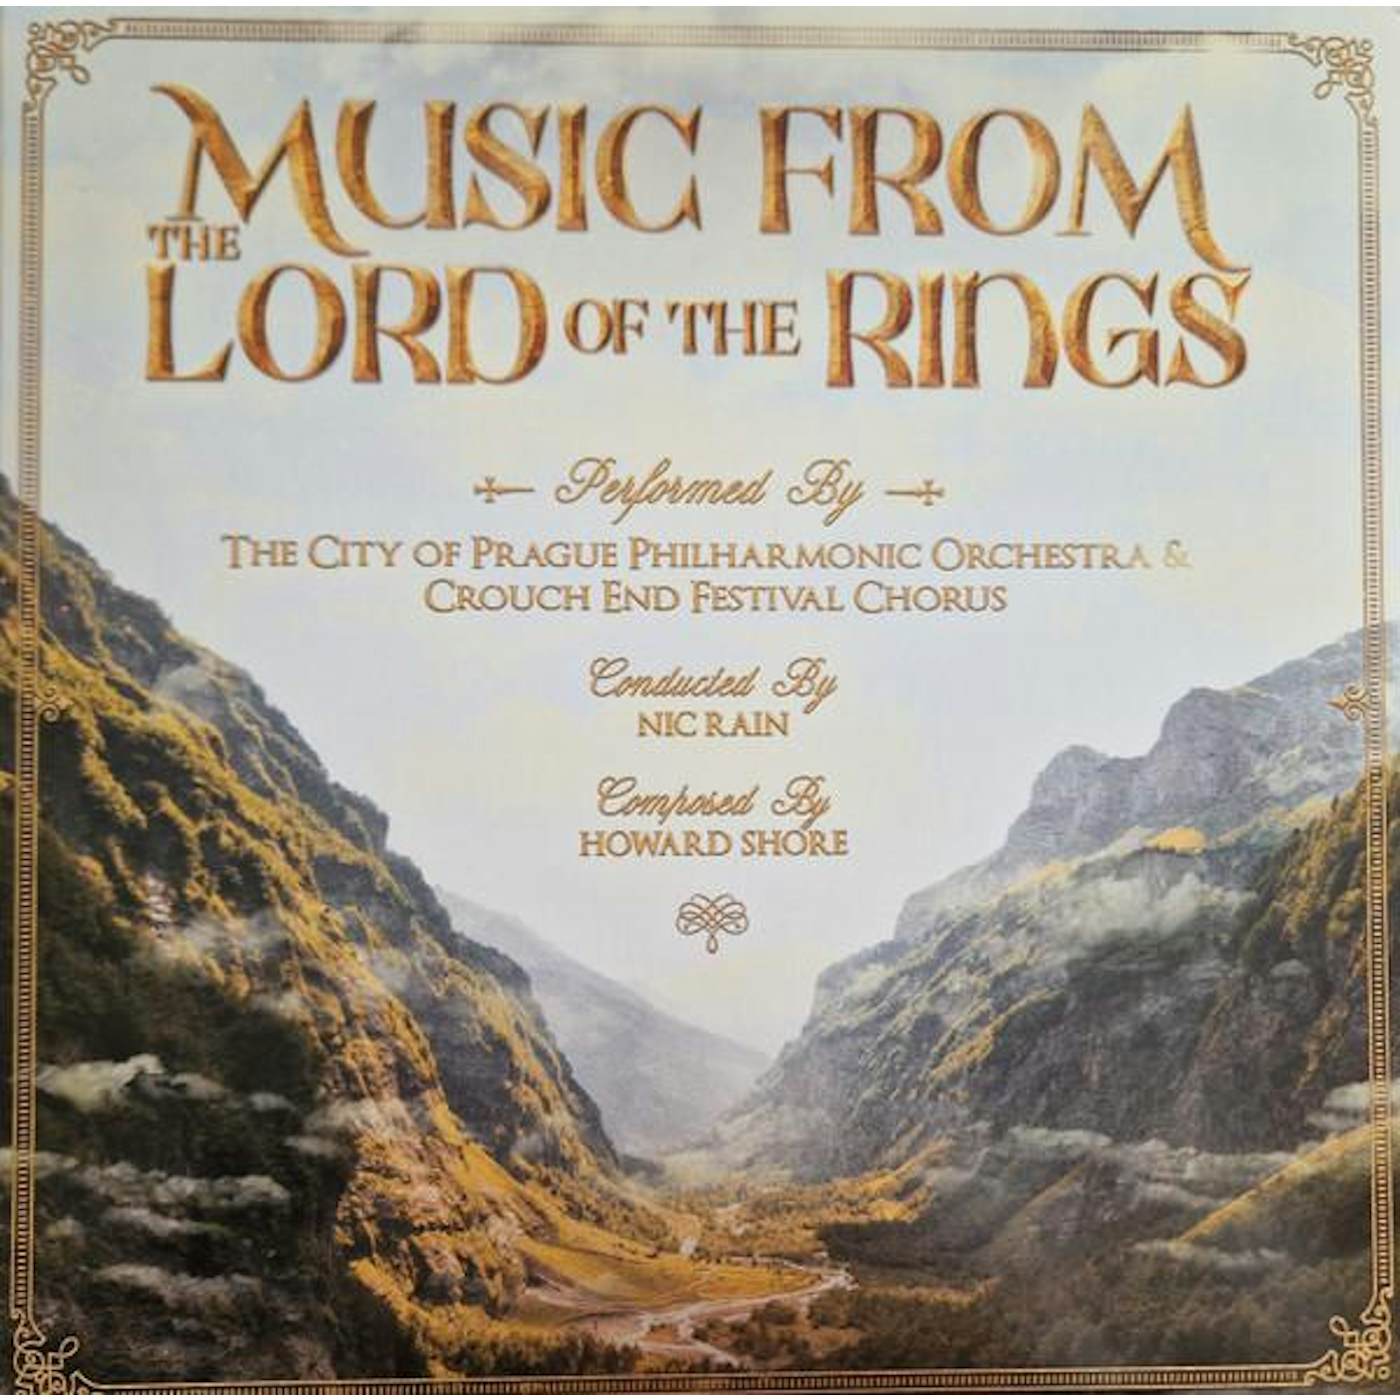 The City of Prague Philharmonic Orchestra MUSIC FROM THE LORD OF THE RINGS Vinyl Record